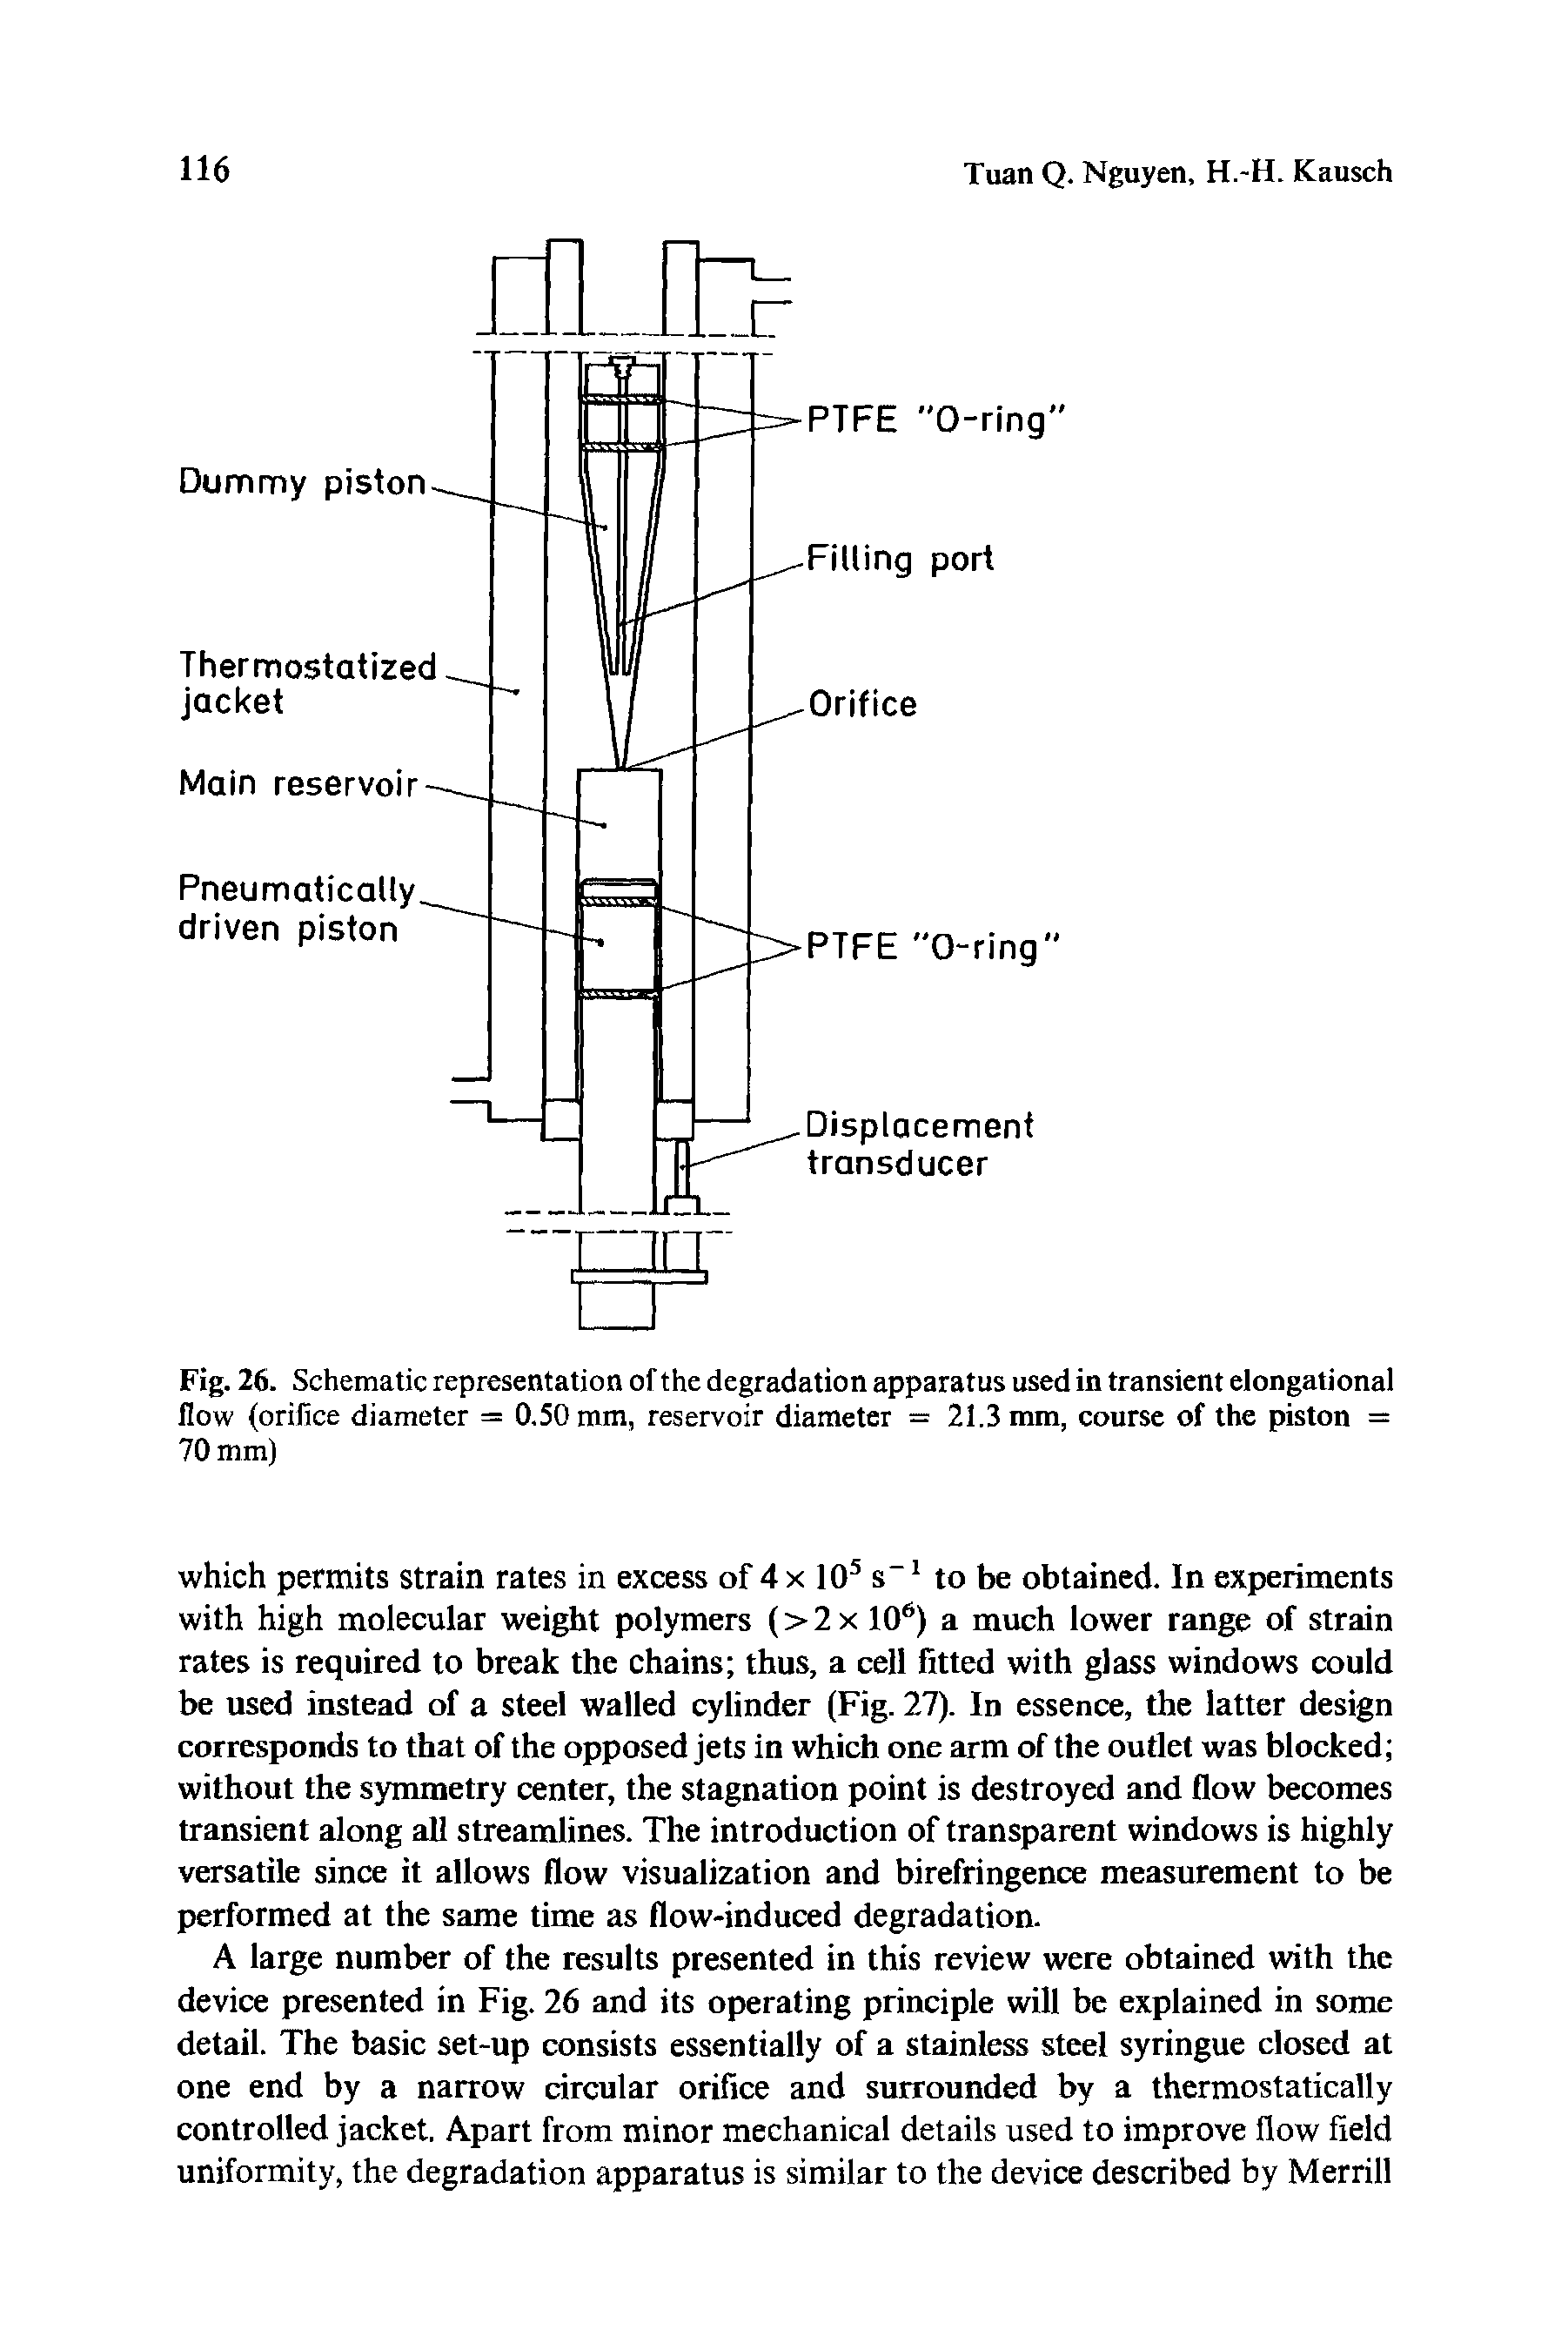 Fig. 26. Schematic representation of the degradation apparatus used in transient elongational flow (orifice diameter = 0,50 mm, reservoir diameter = 21.3 mm, course of the piston = 70 mm)...